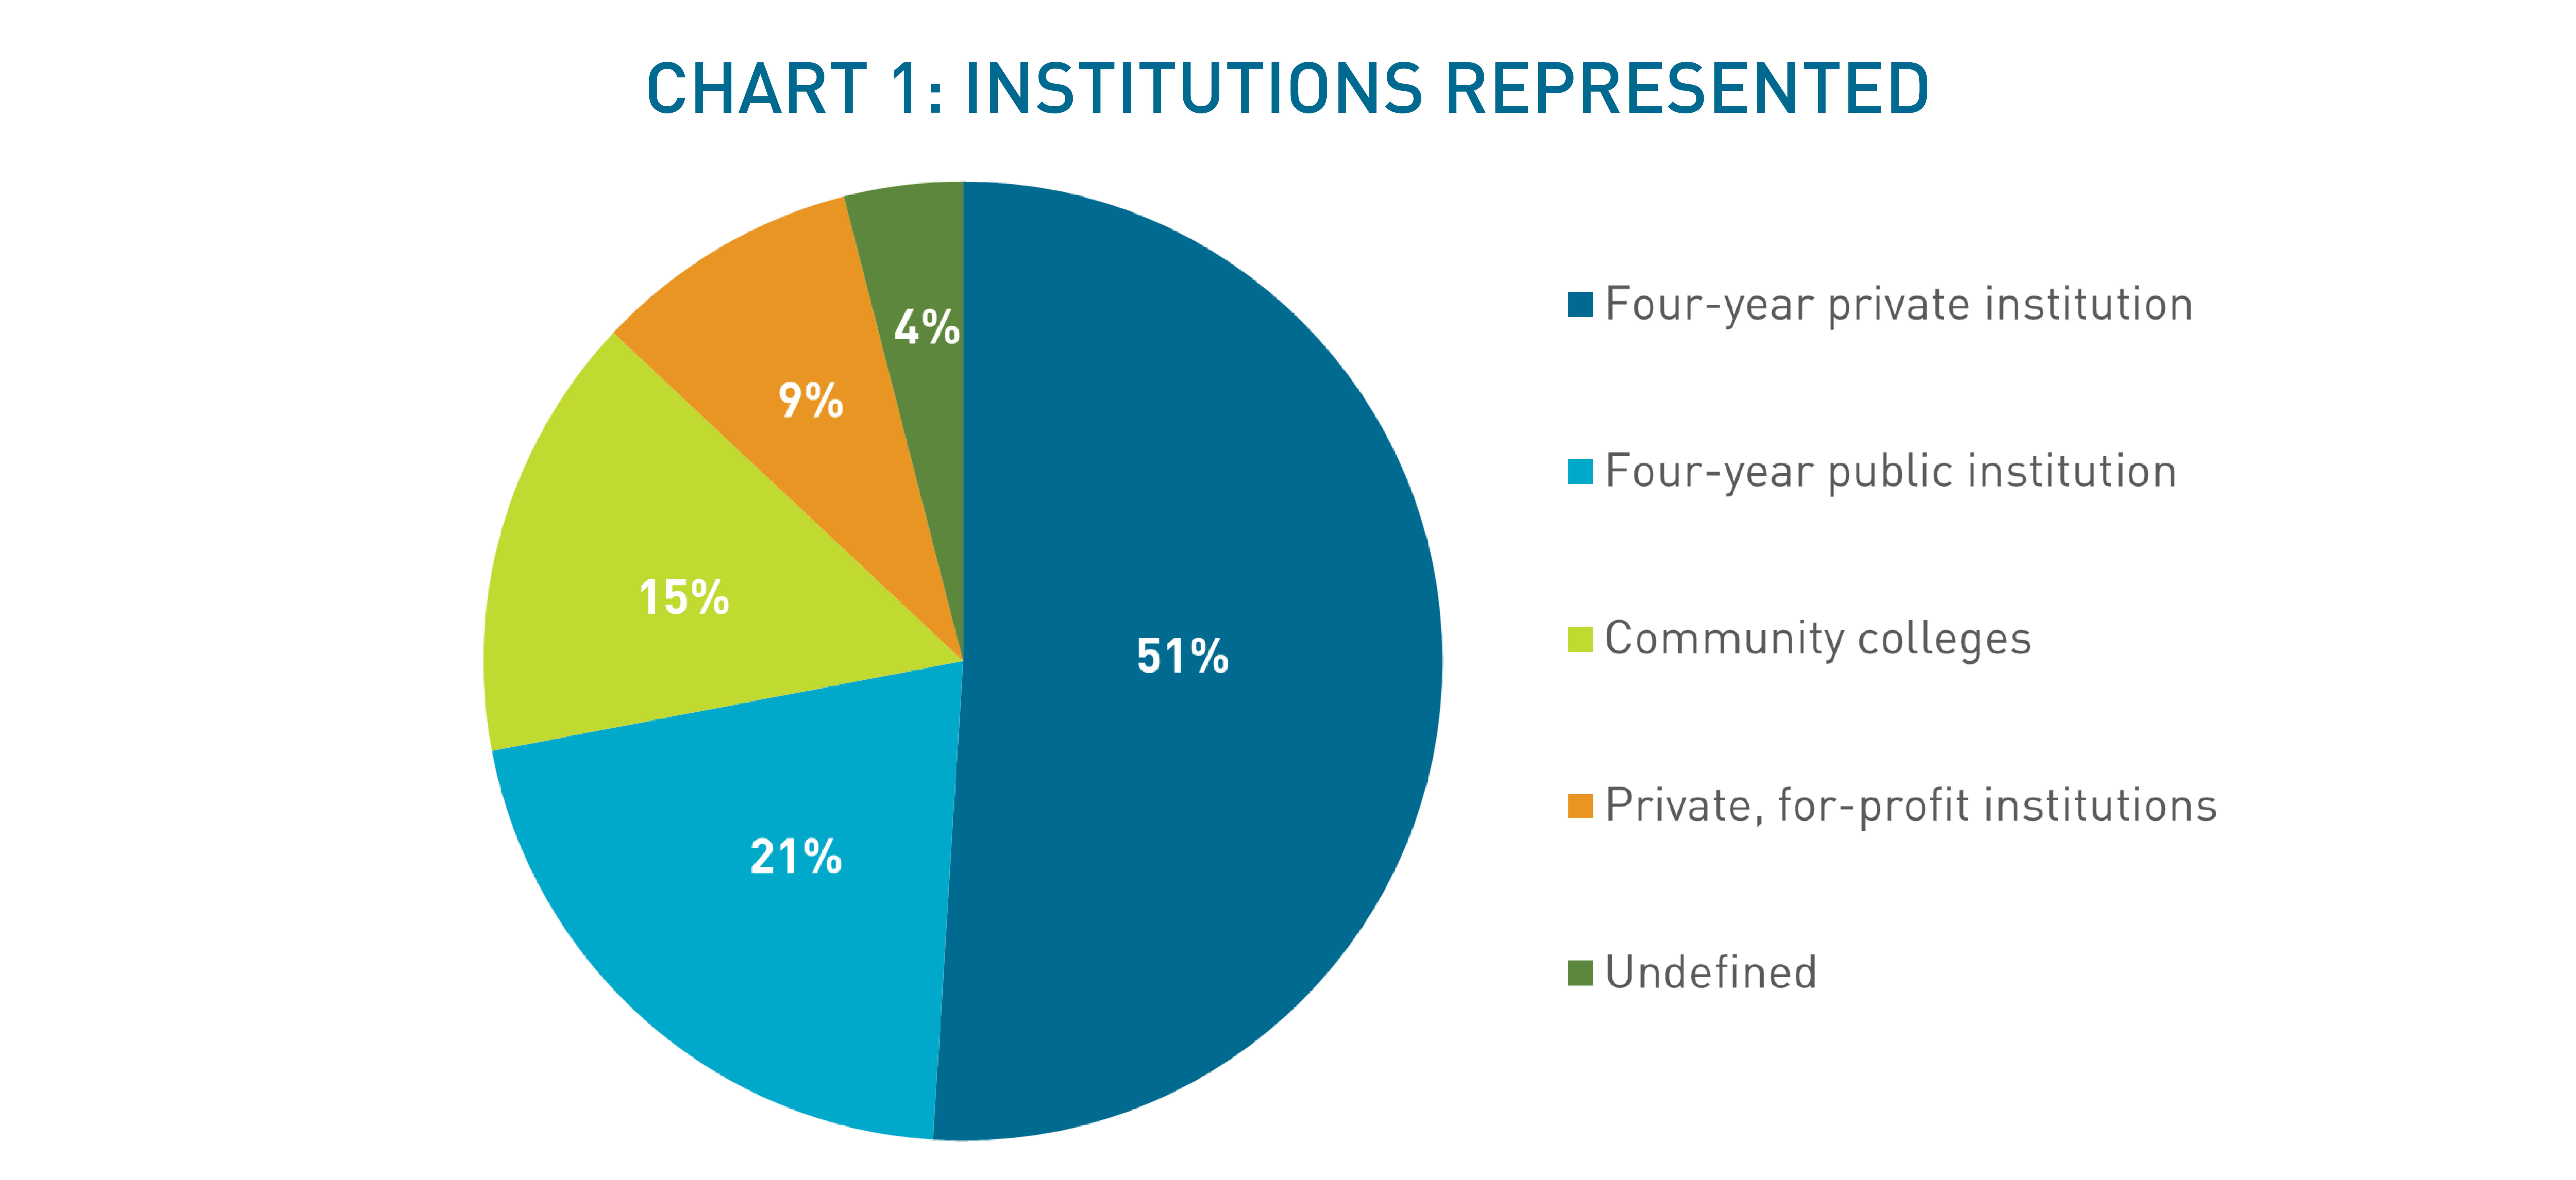 A pie chart shows which types of institutions were surveyed